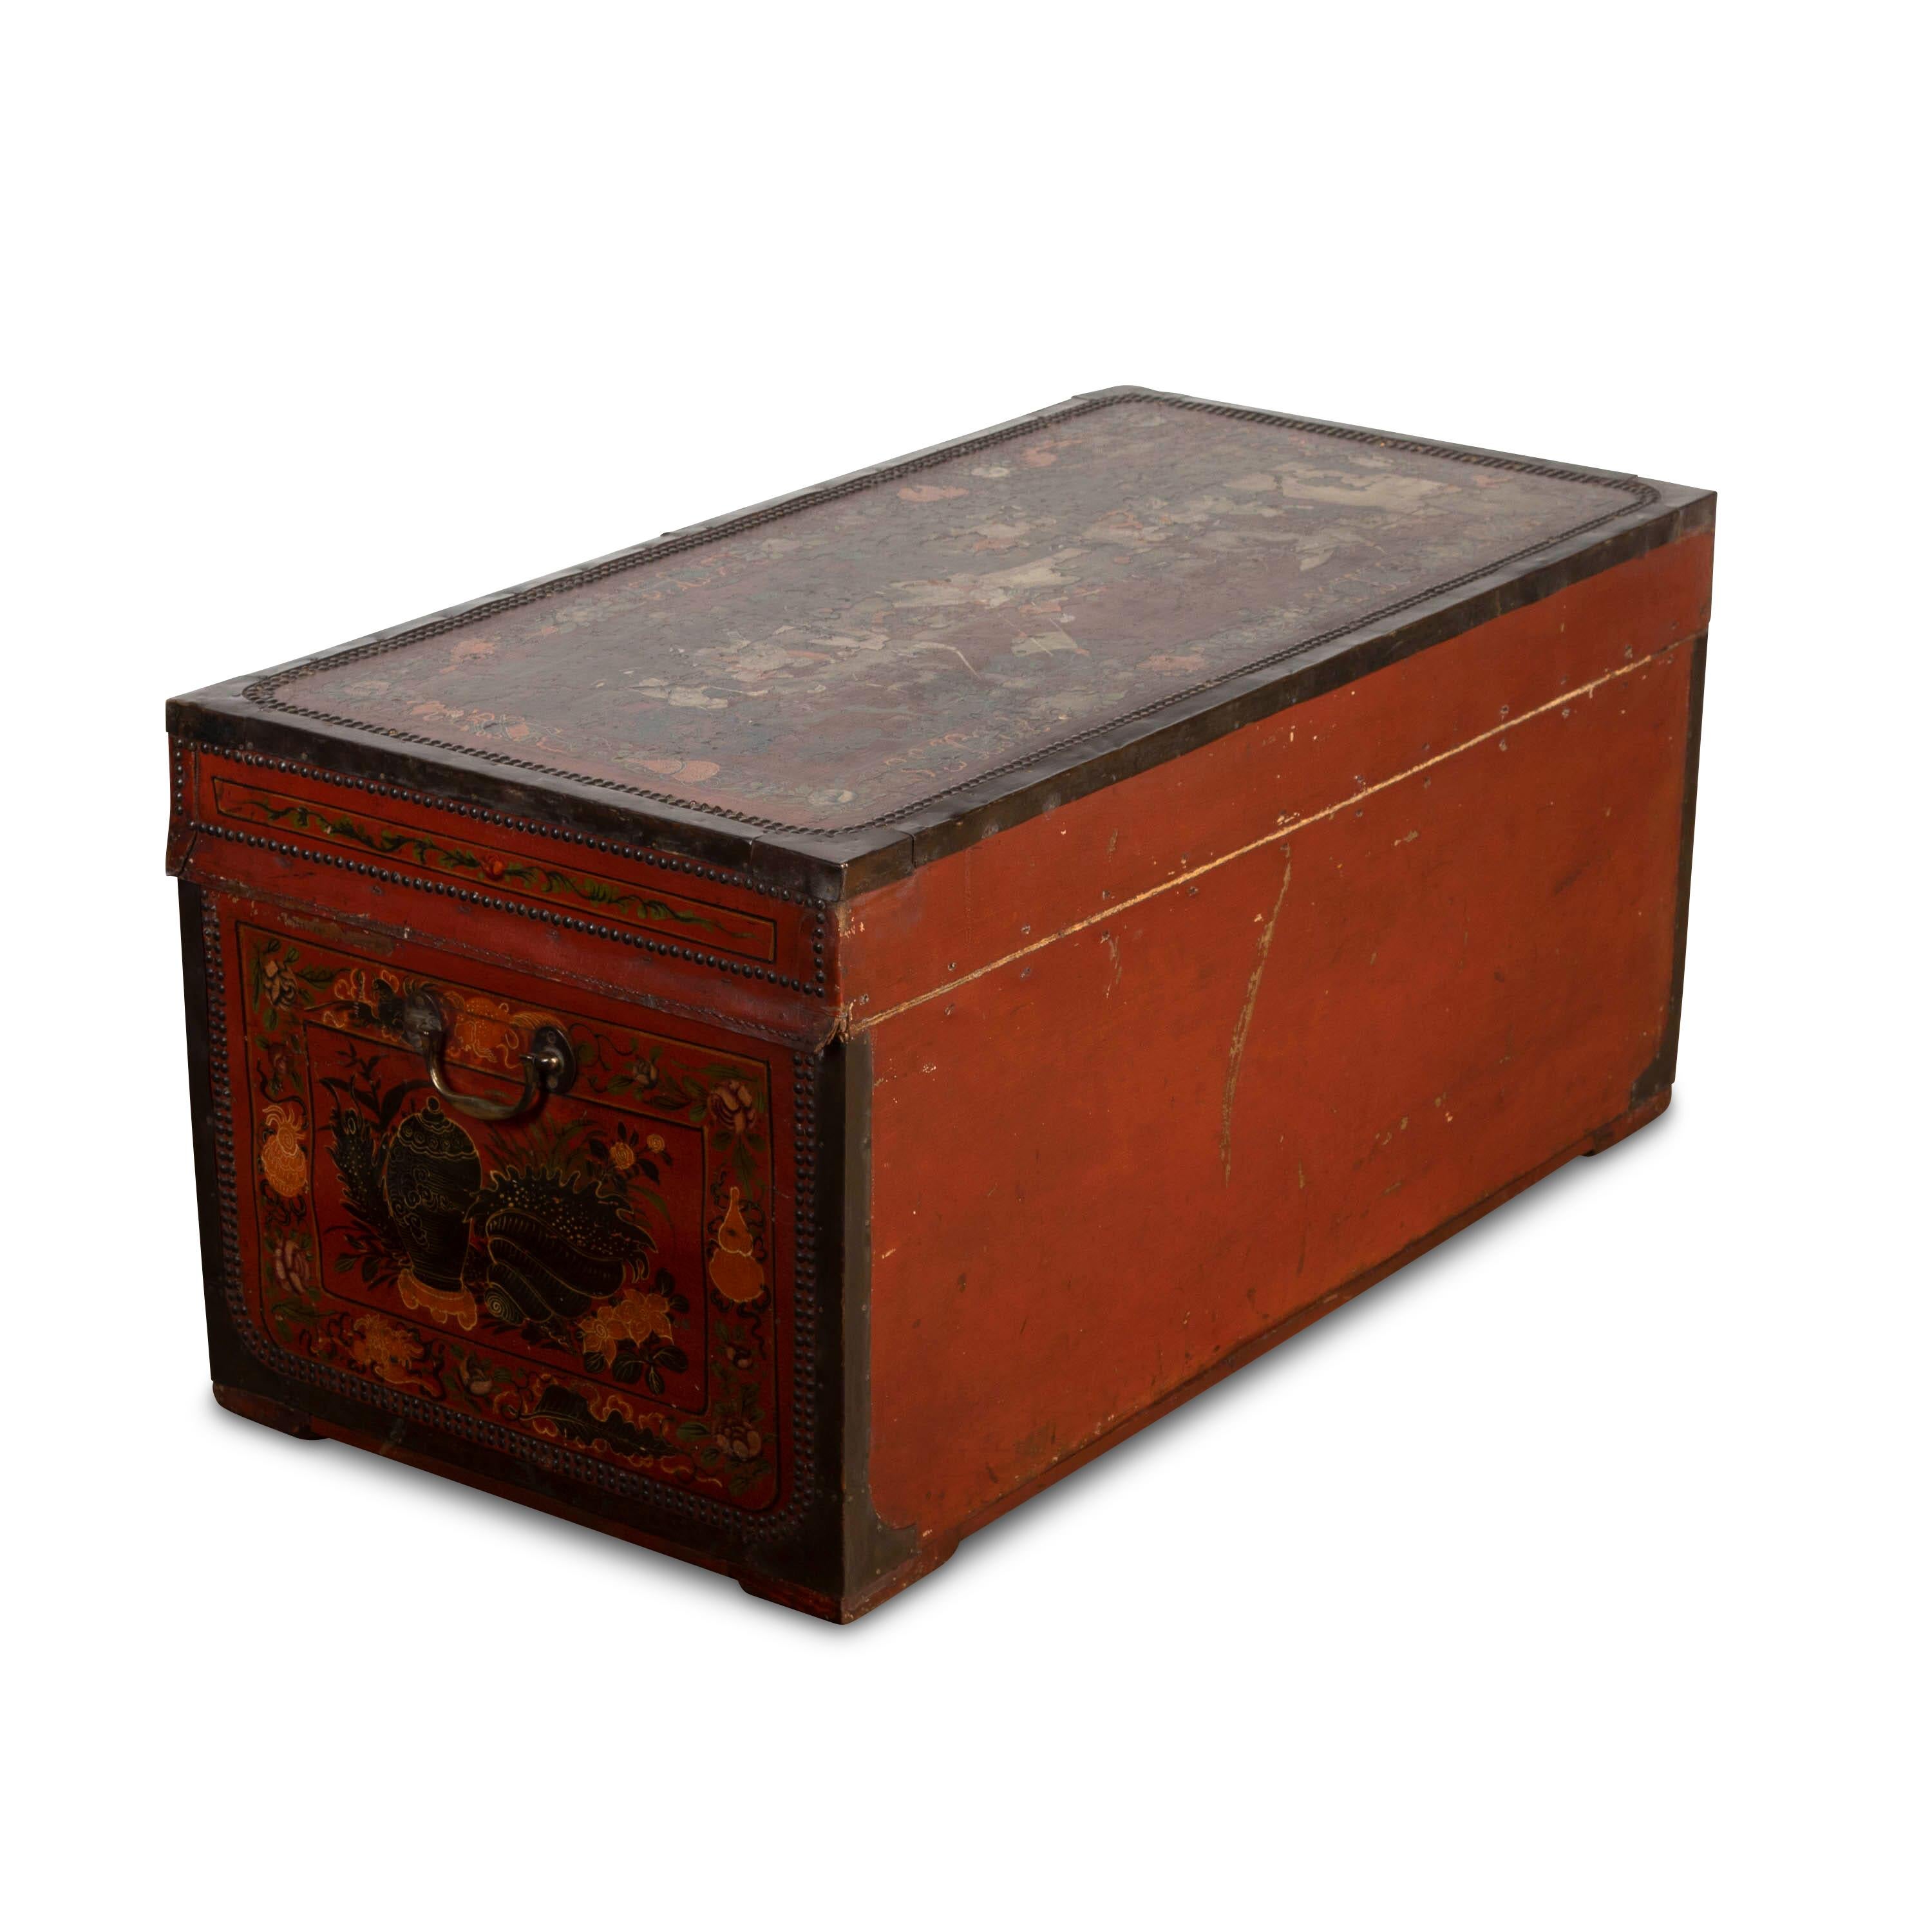 A wonderful early 19th Century Chinese export polychrome painted trunk, the leather decorated with chinoiserie scenes of figures in different activities with foliate borders and red ground. The whole brass bound and studded, with camphor interior. A